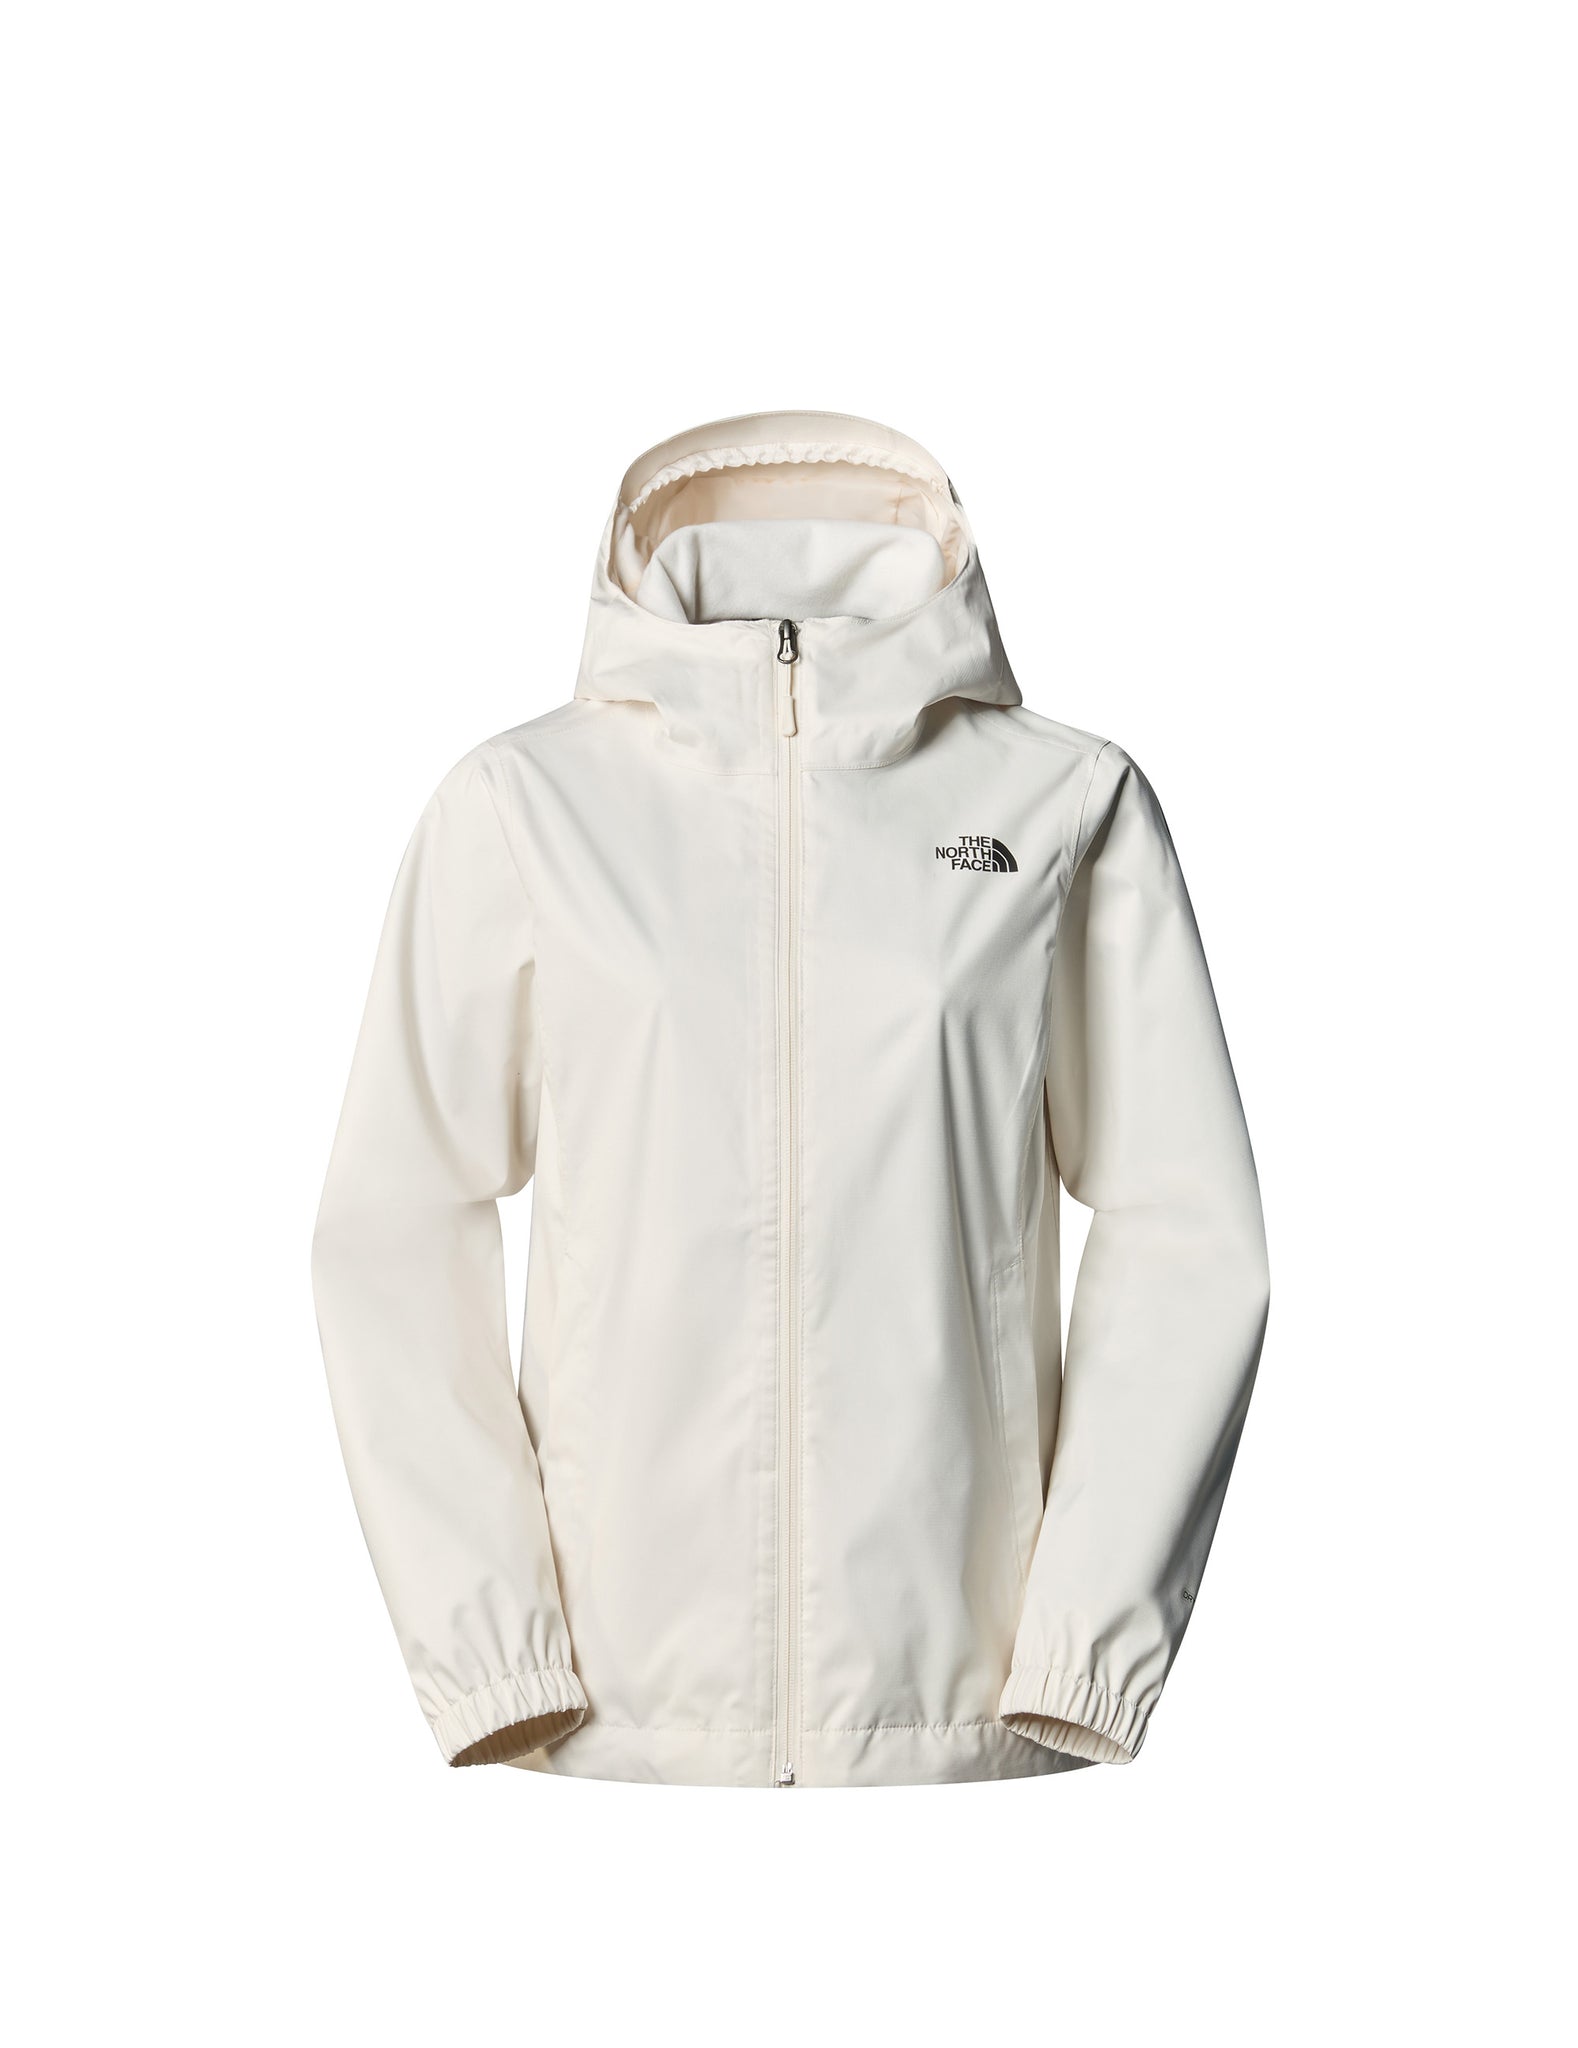 The North Face Women'S Quest Jacket White Women